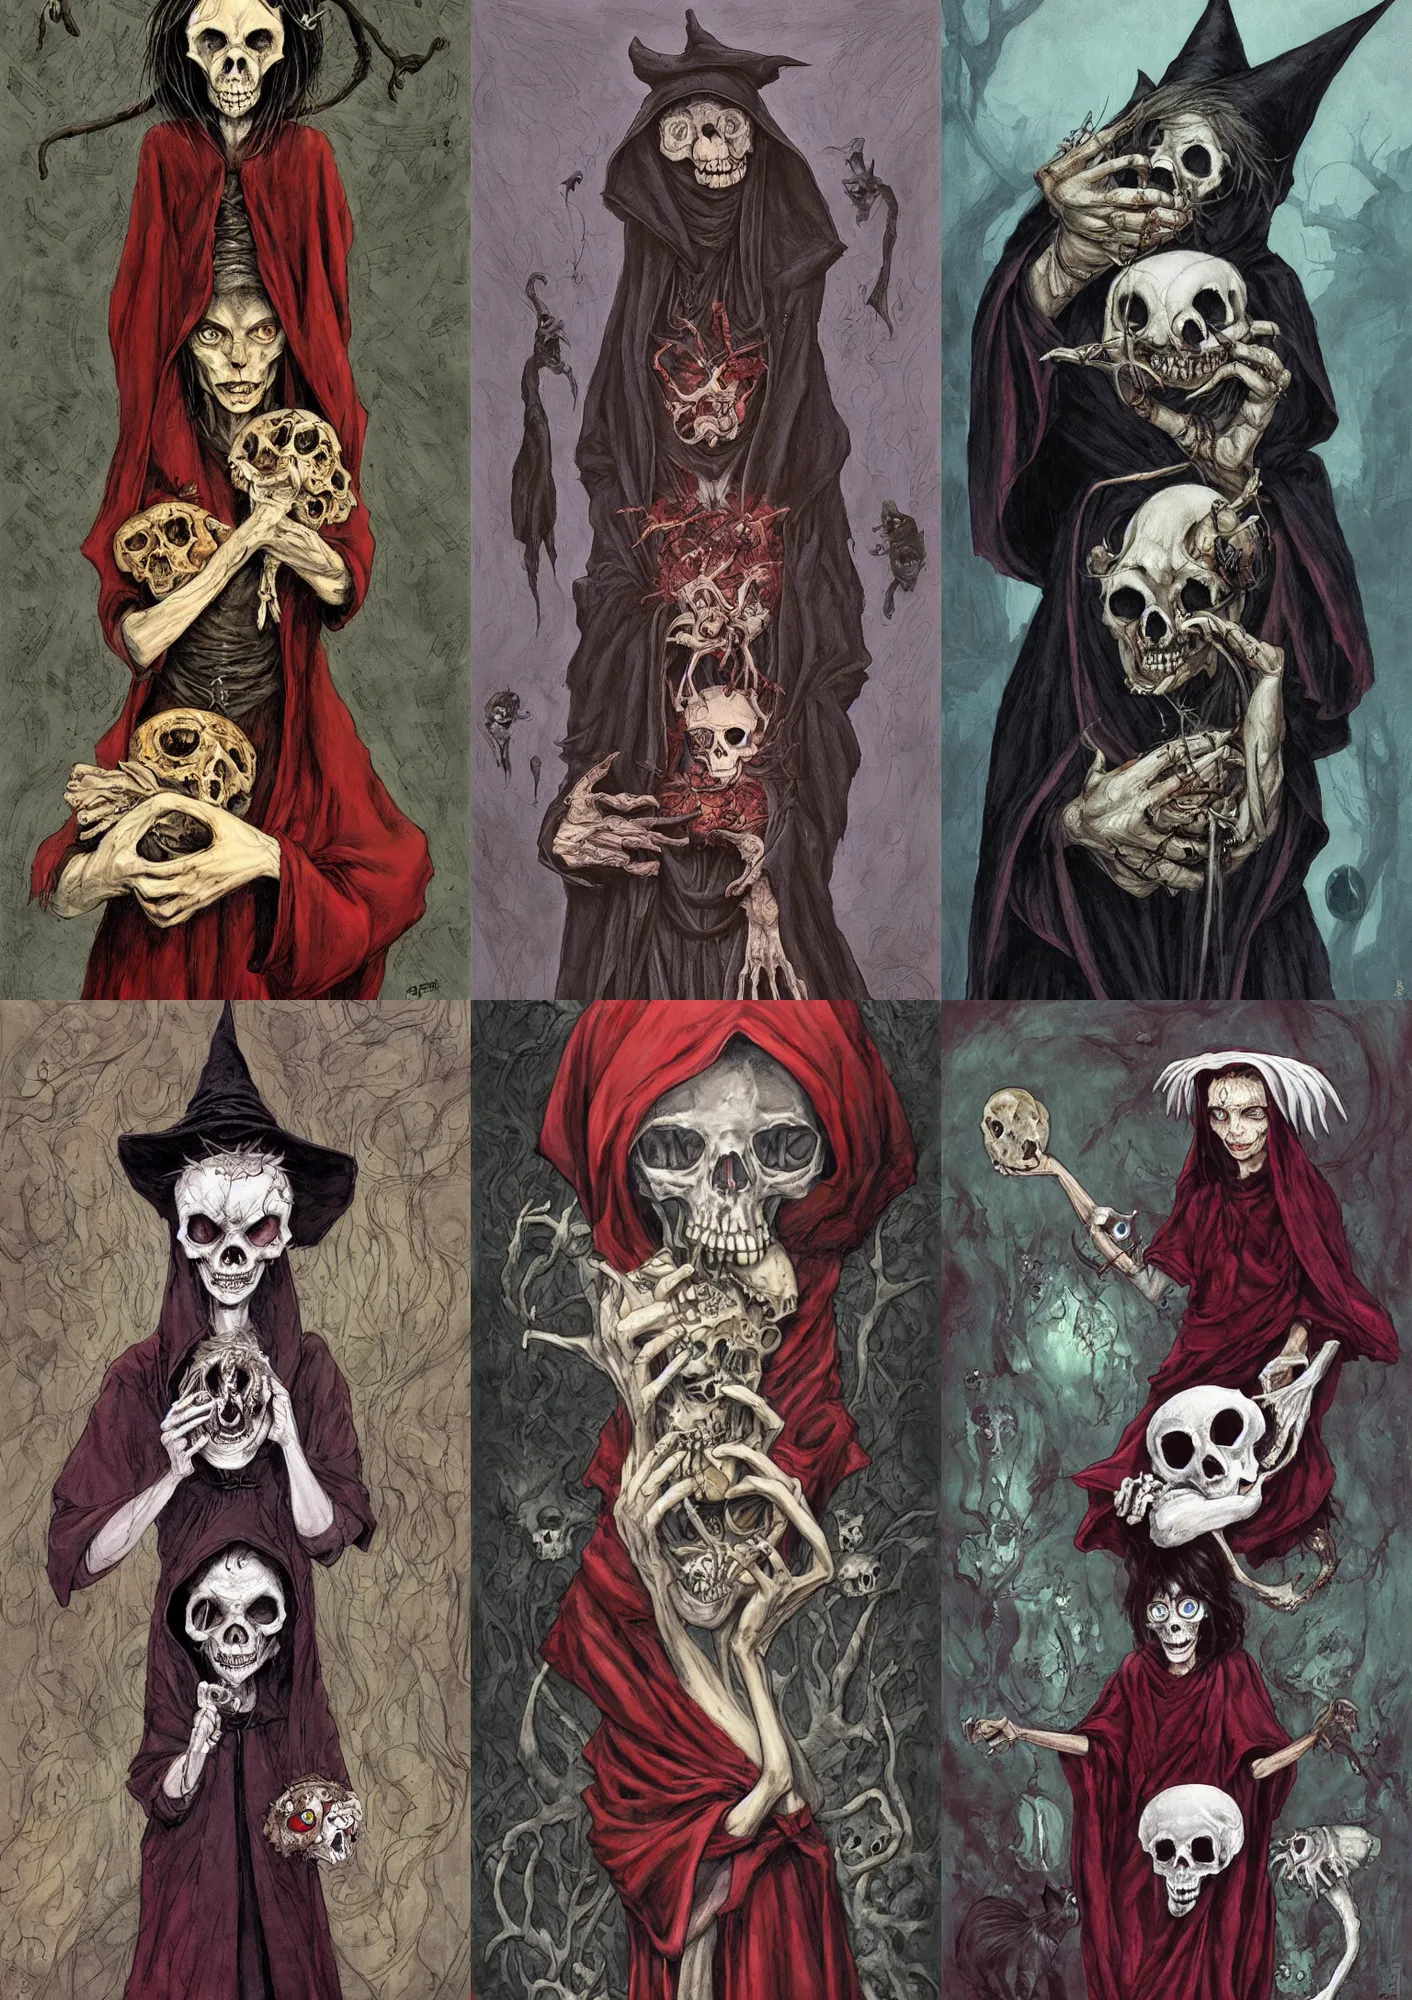 Prompt: a witch with ruby eyes, stares at a cat skull in her hands. she wear a long dark robe. painted by regis loisel and enki bilal and tony sandoval and oliver ledroit. oil painting.